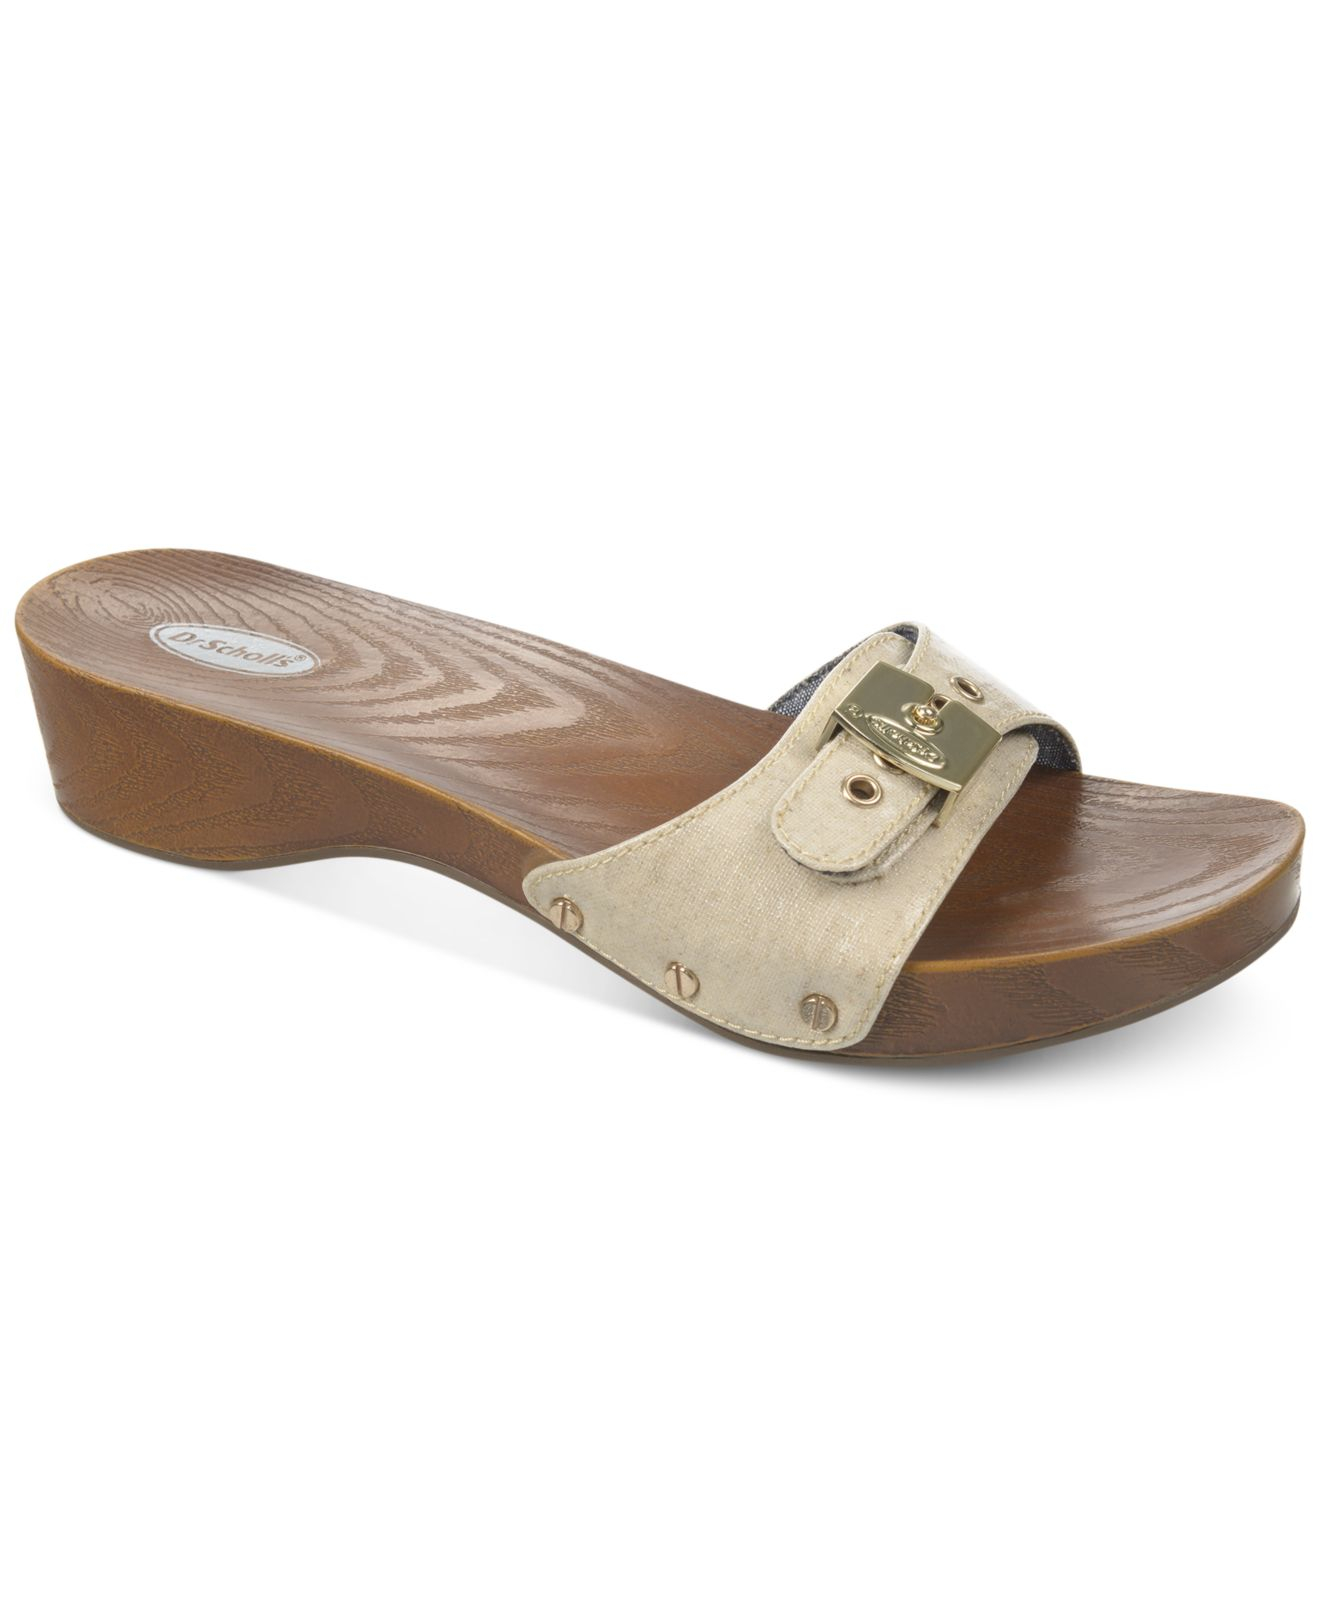 Lyst Dr Scholls Classic Sandals in Natural